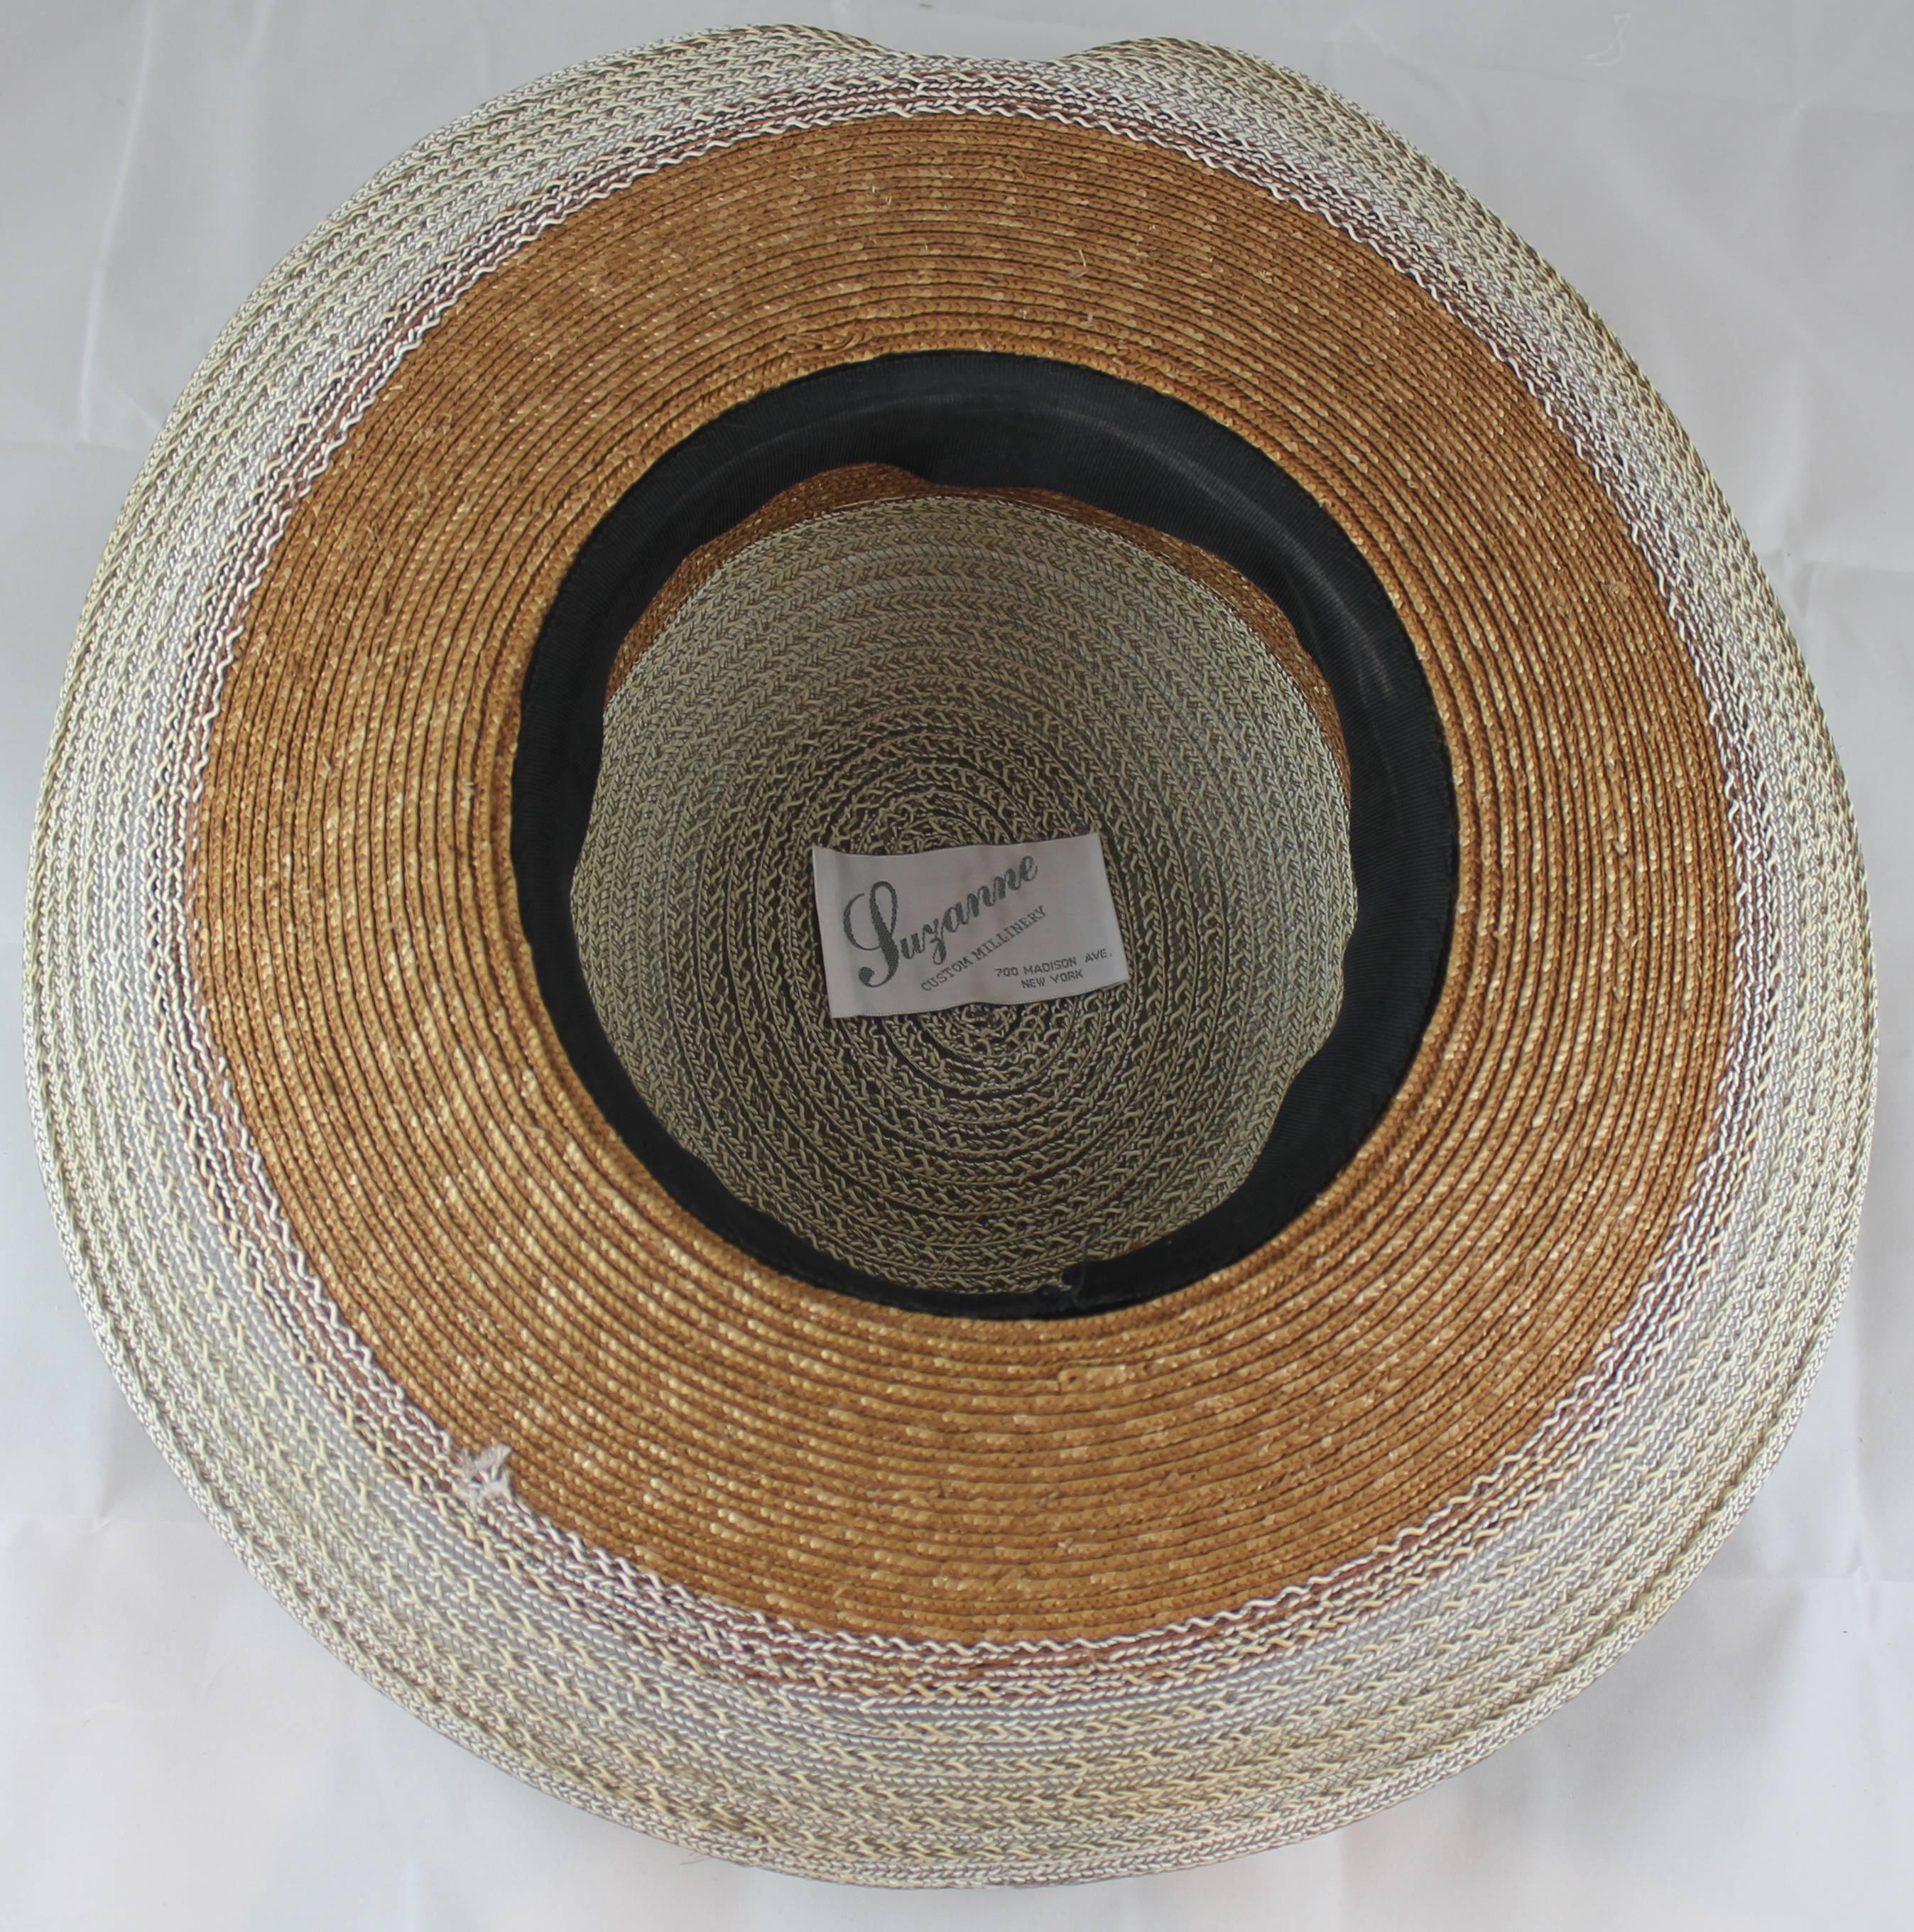 Women's Suzanne Couture Millinery Ivory and Beige Straw Hat